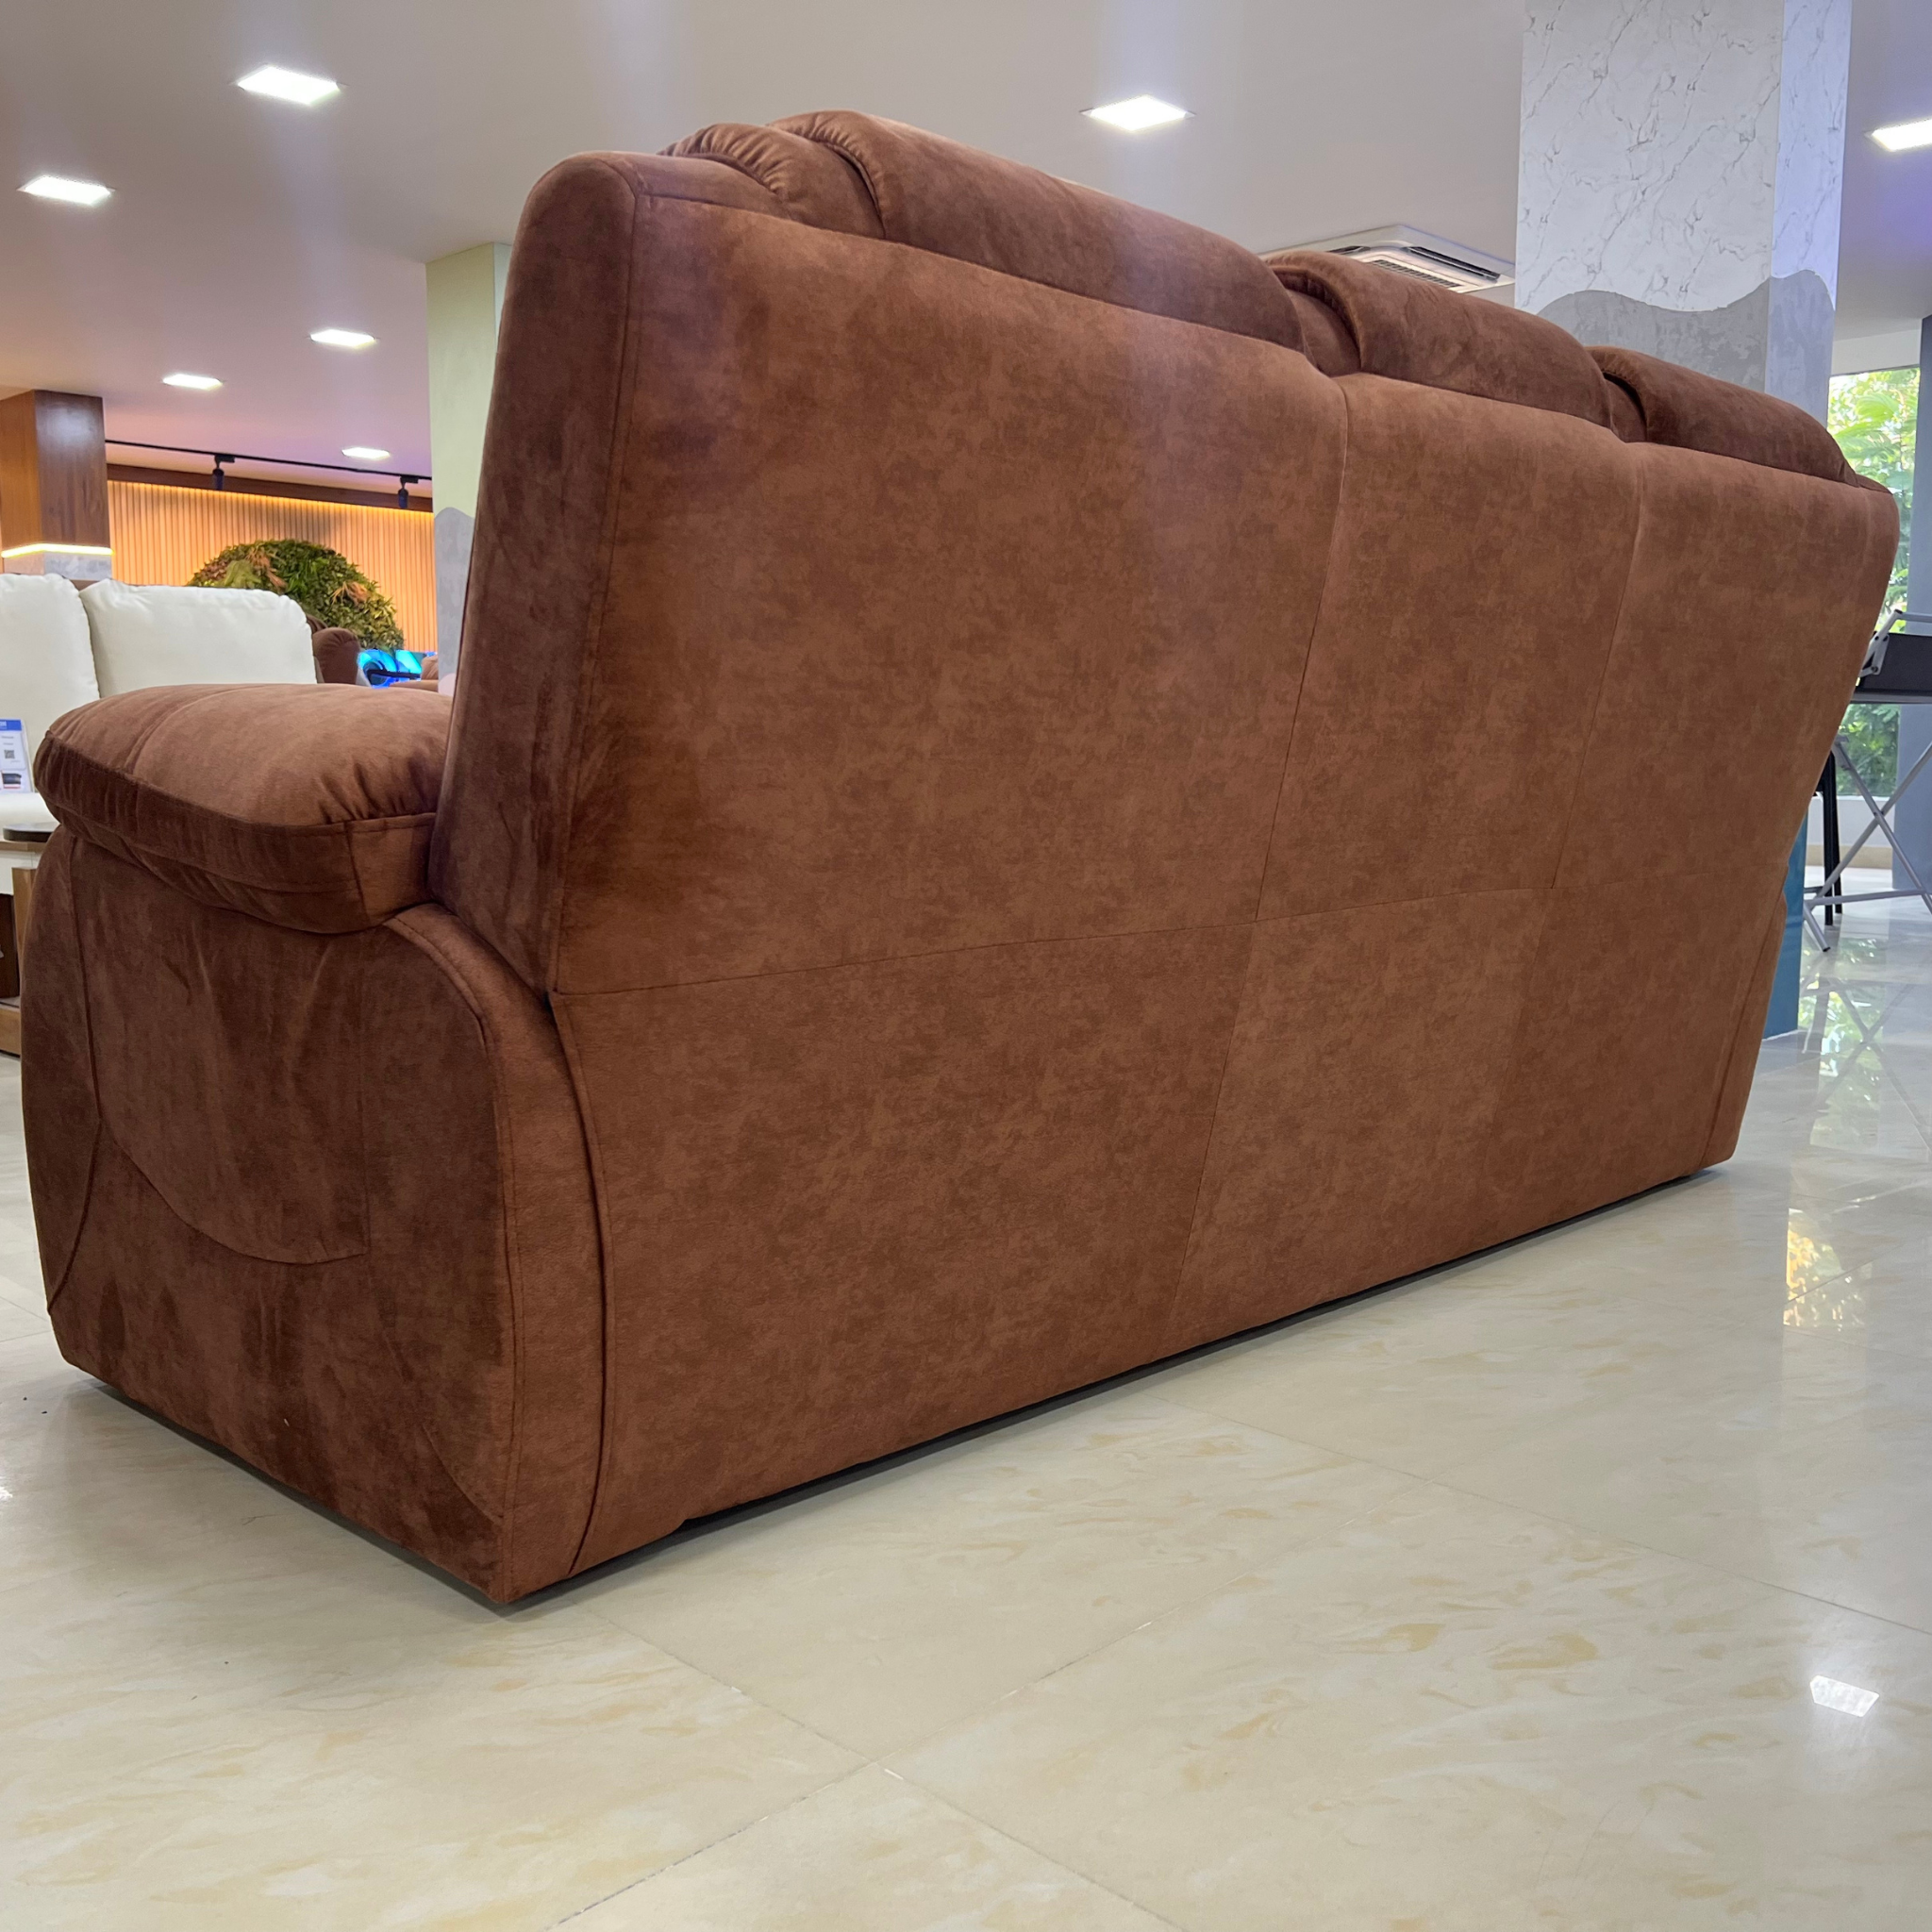 Sinclair Sofa with Recliner